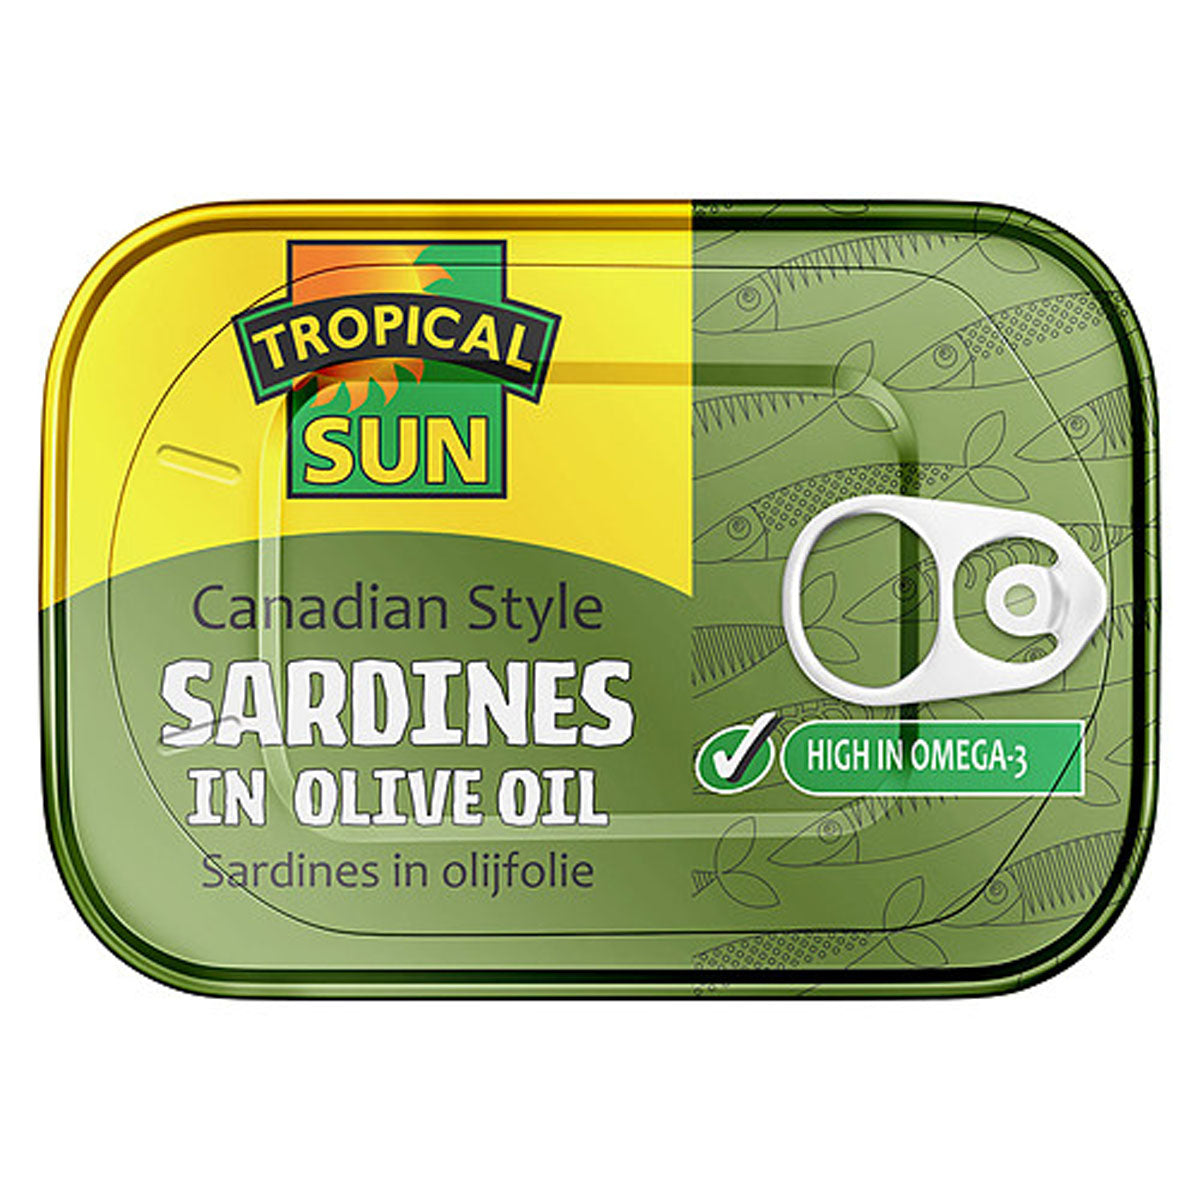 Tropical Sun - Canadian Sardines In Olive Oil - 106g in olive oil.